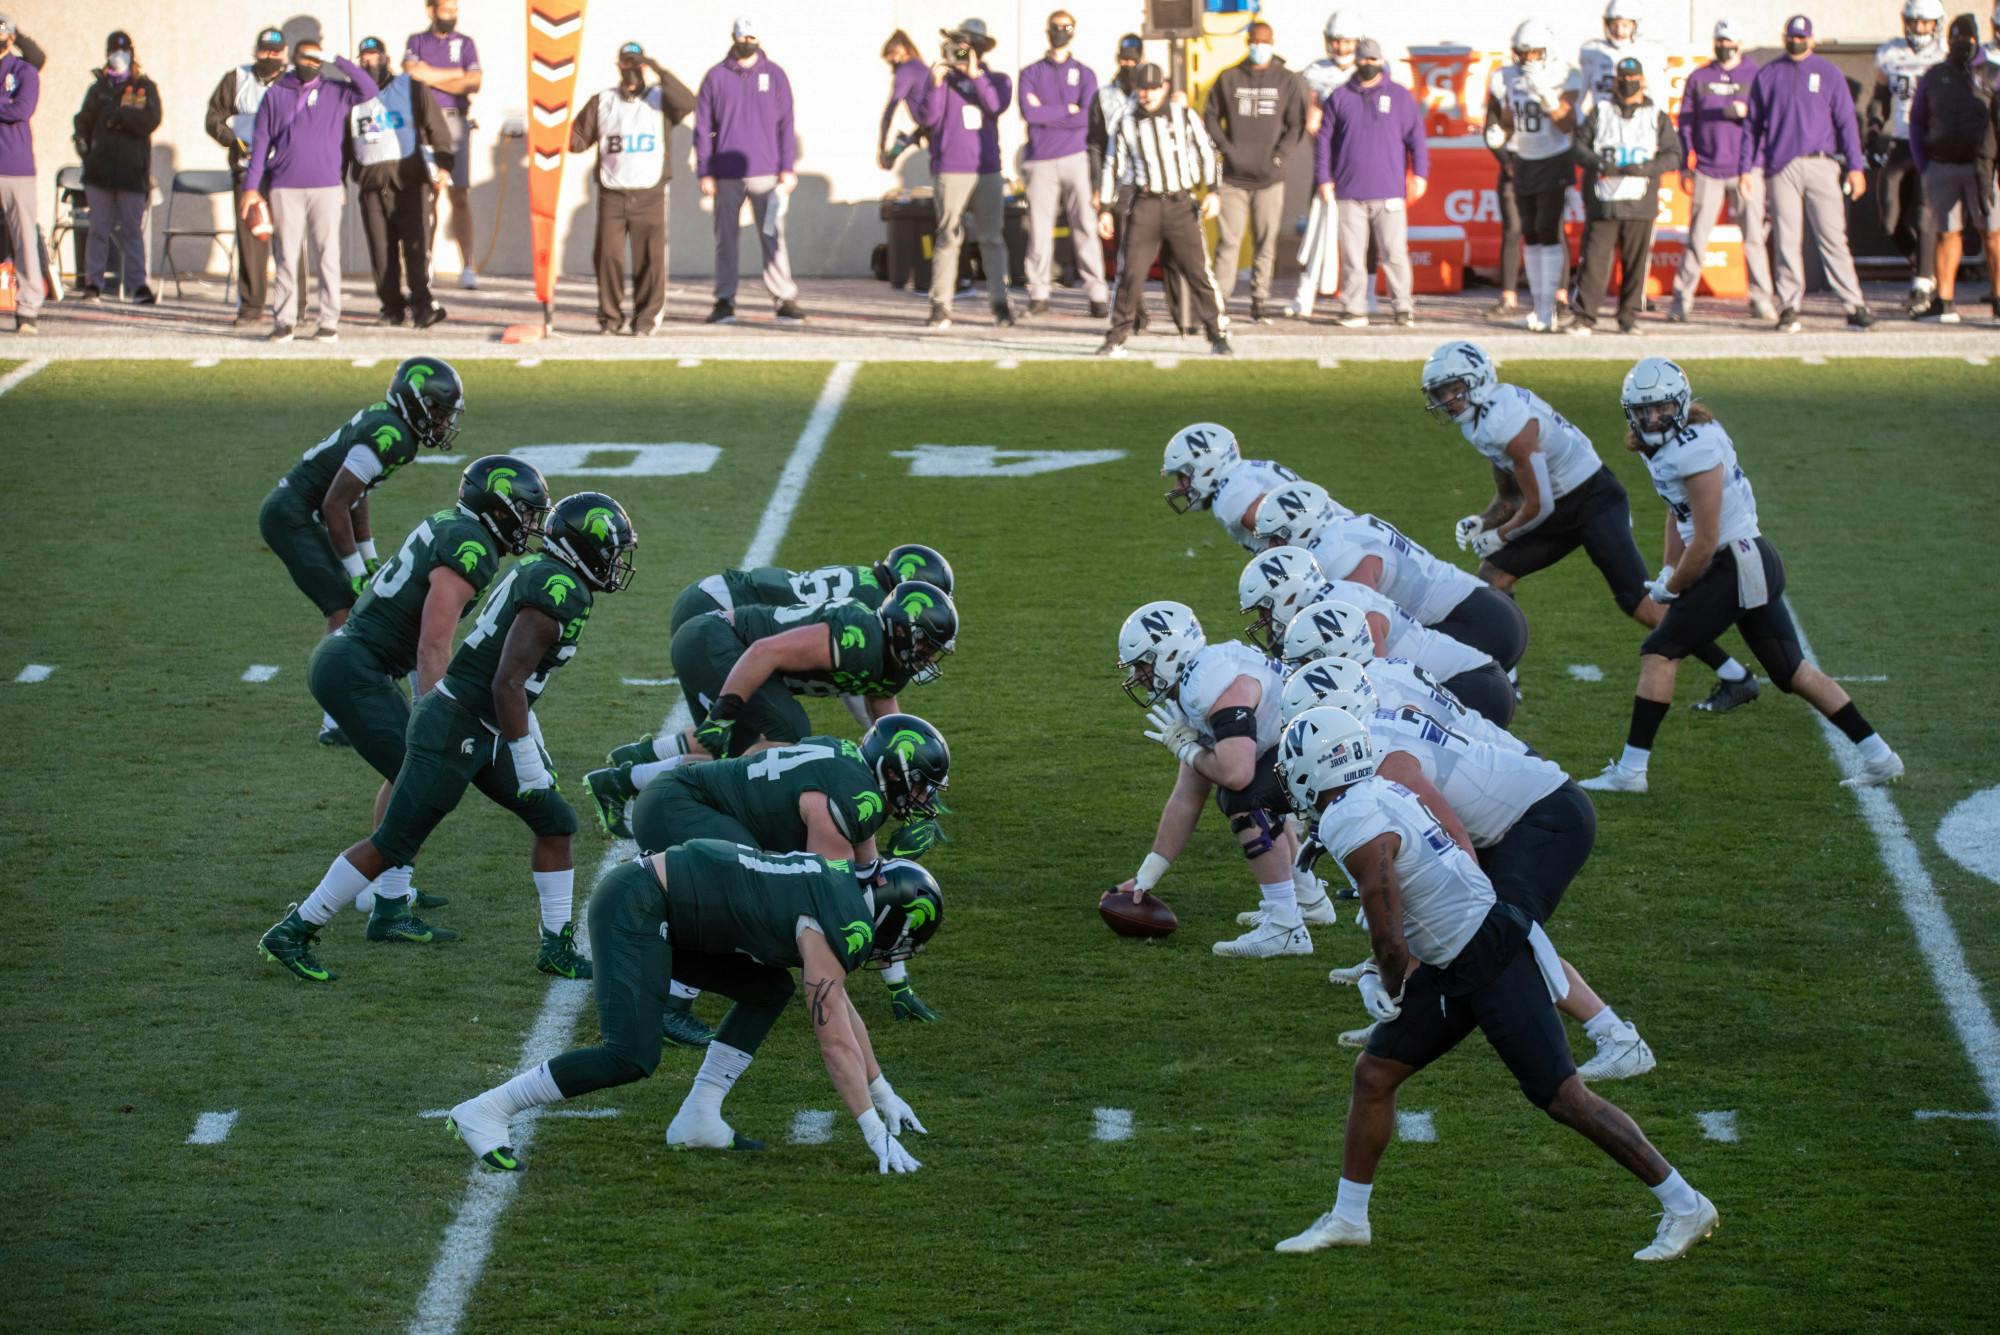 <p>Michigan State University defense lining up on the ball waiting for Northwestern&#x27;s offensive line to move on Saturday, Nov. 28, 2020.</p>